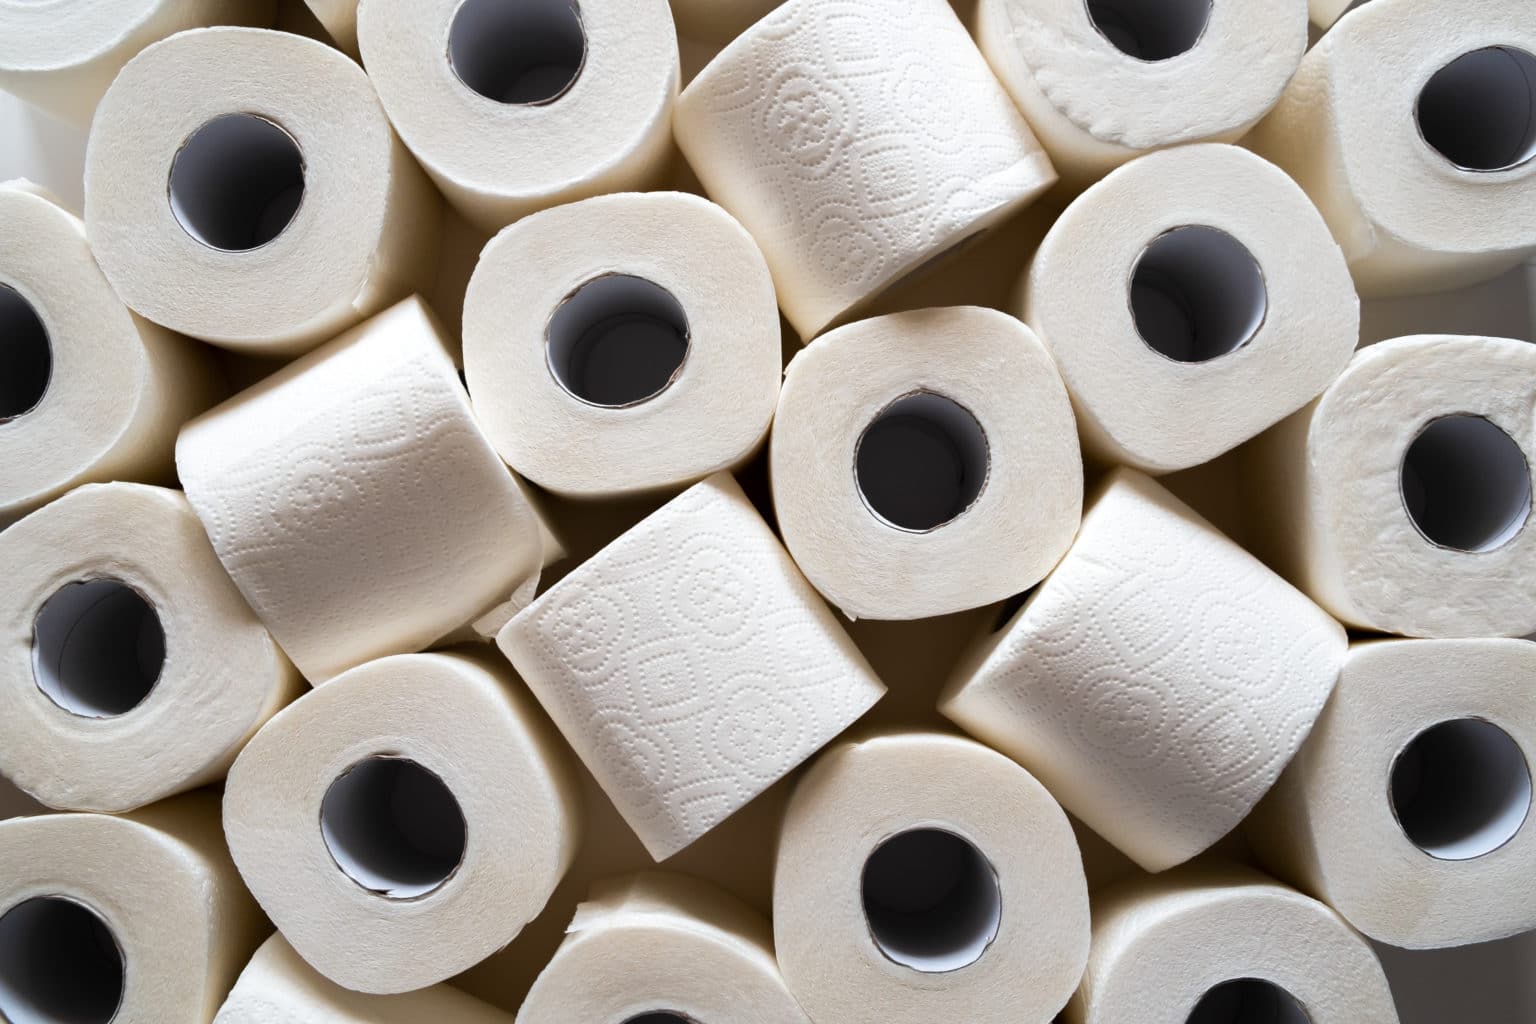 research papers on toilet paper